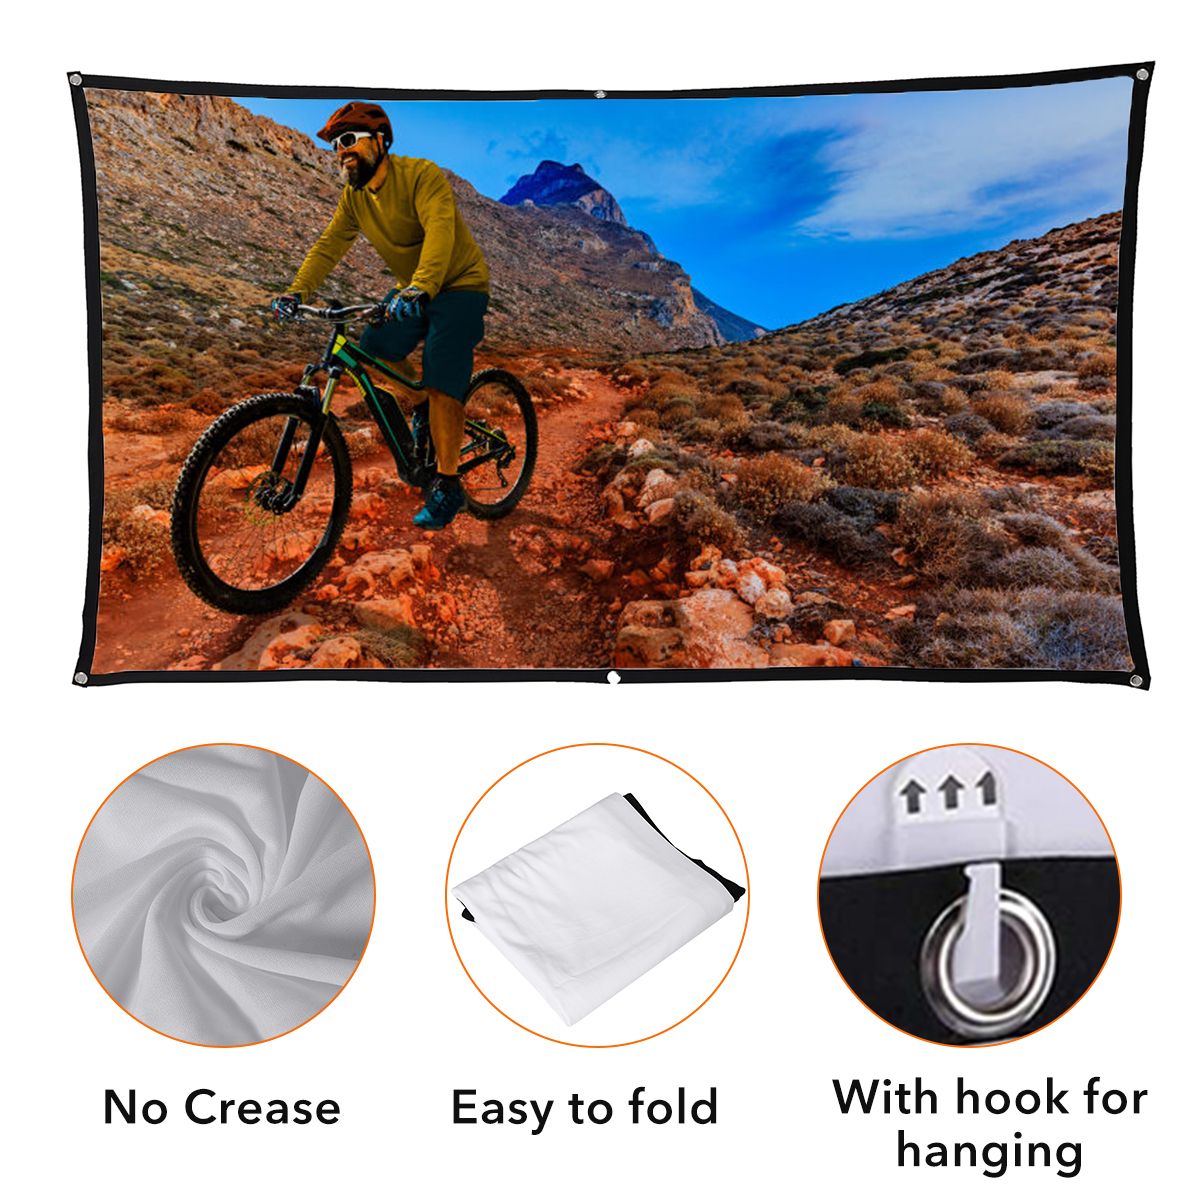 16-9-Projector-Screen-Home-Projection-Screen-Cloth-Outdoor-Portable-Folding-Simple-Soft-Curtain-with-1749217